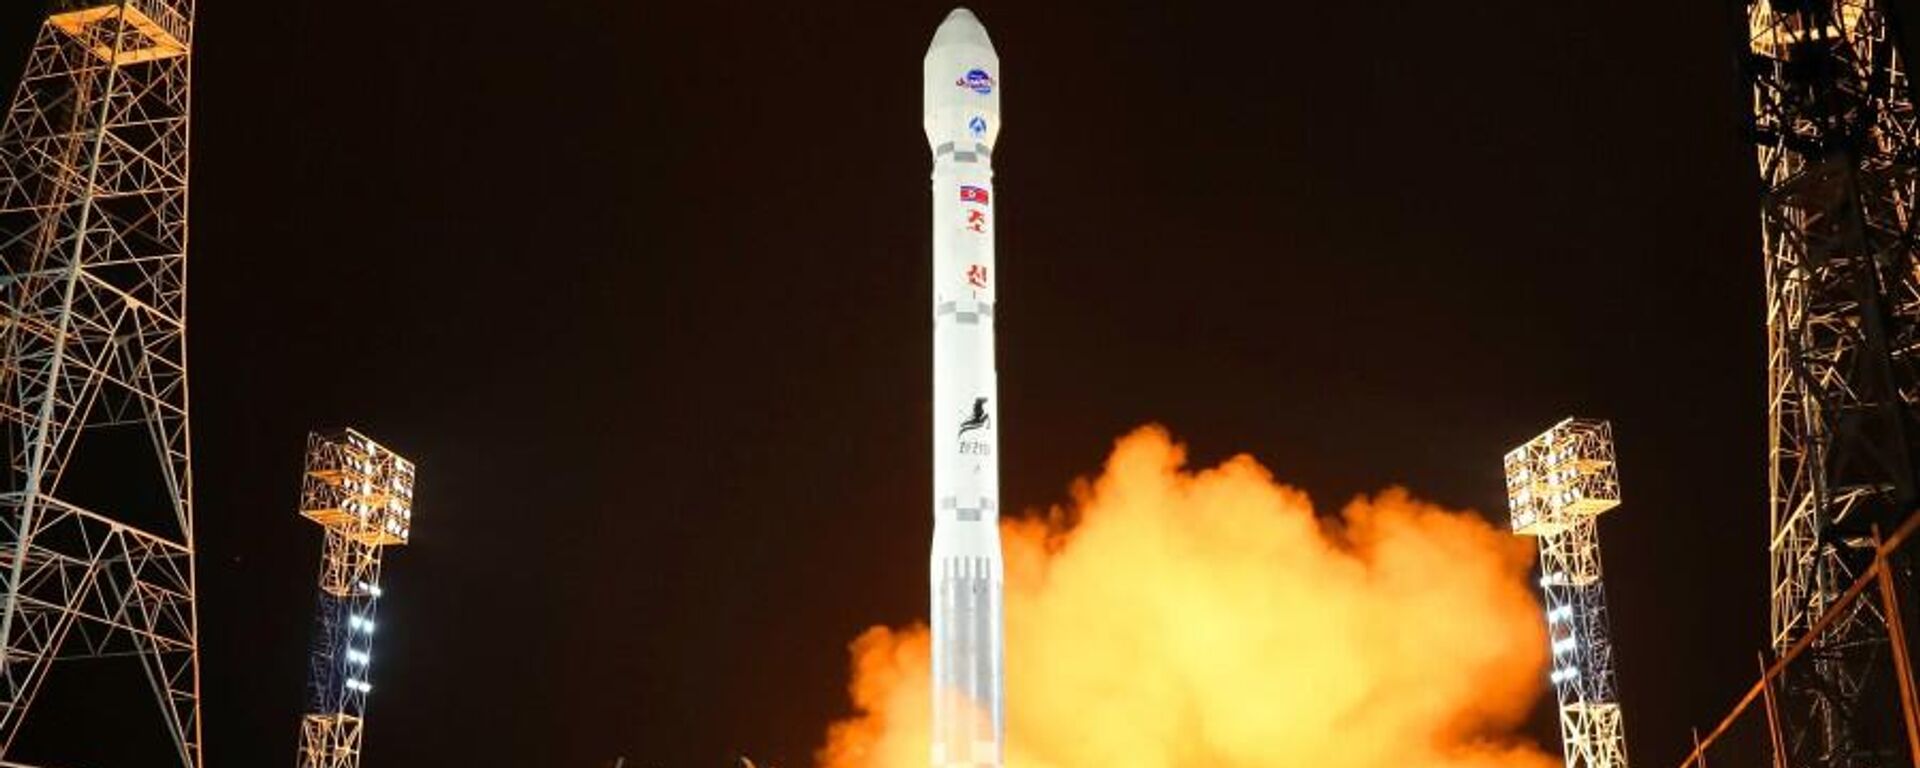 The General Bureau of Aerospace Engineering of the DPRK successfully launched the Manrigyong-1 reconnaissance satellite at 22 hours, 42 minutes and 28 seconds on November 21, 112 Juche (2023) using a new type of Chollima-1 carrier rocket from Sohae Space Center in Cholsan County, North Pyongan Province. - Sputnik International, 1920, 28.11.2023